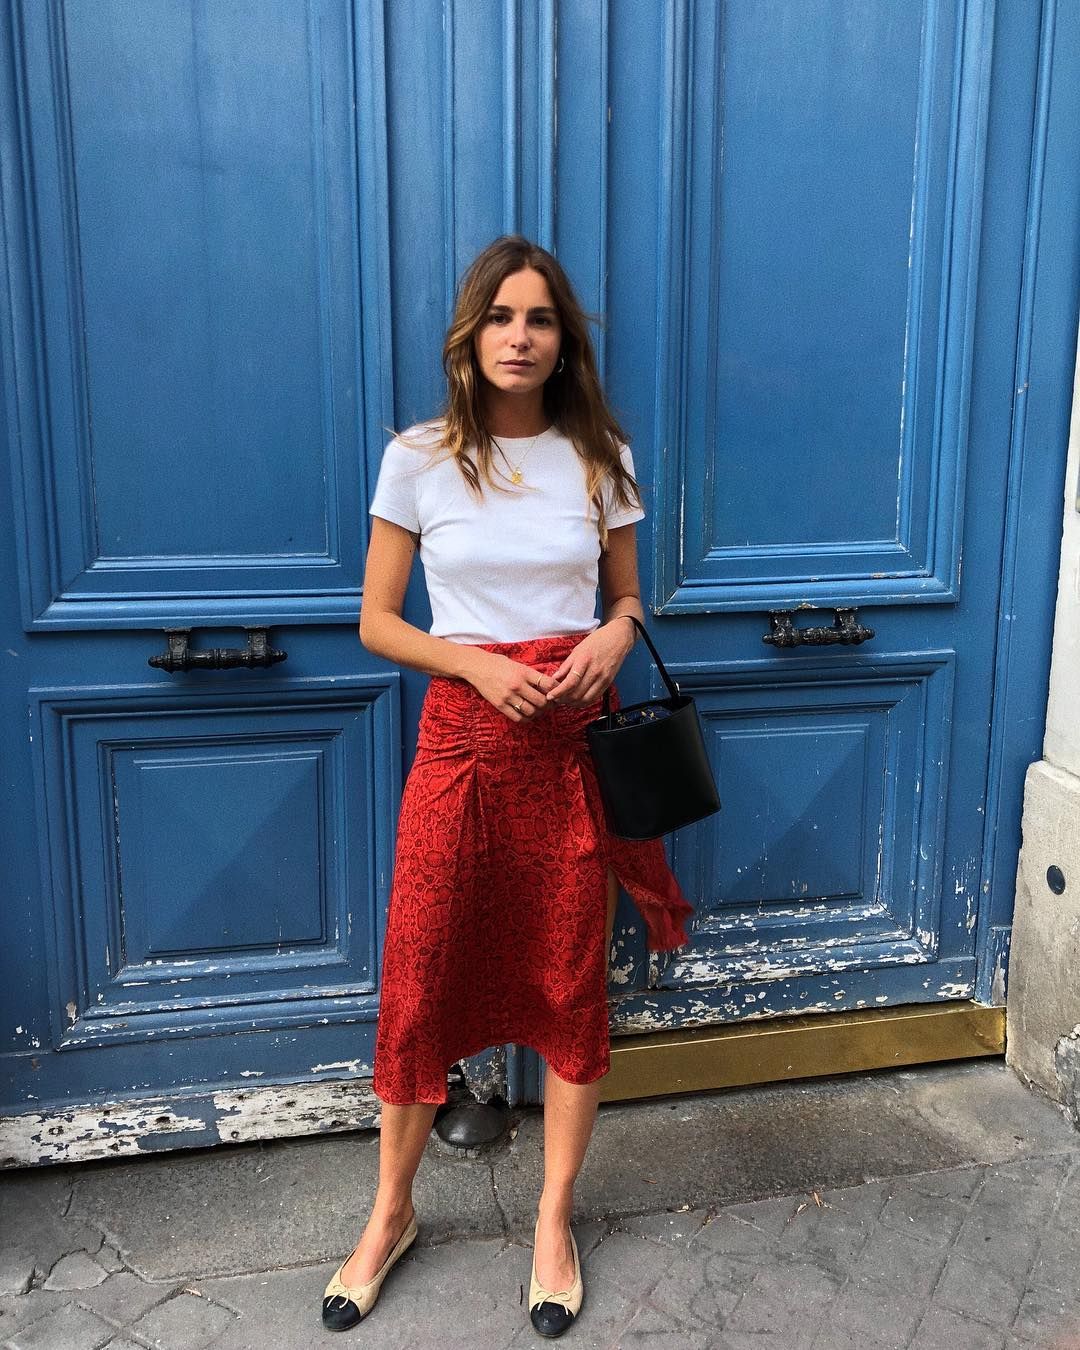 French Style Influencers - Eleonore Toulin